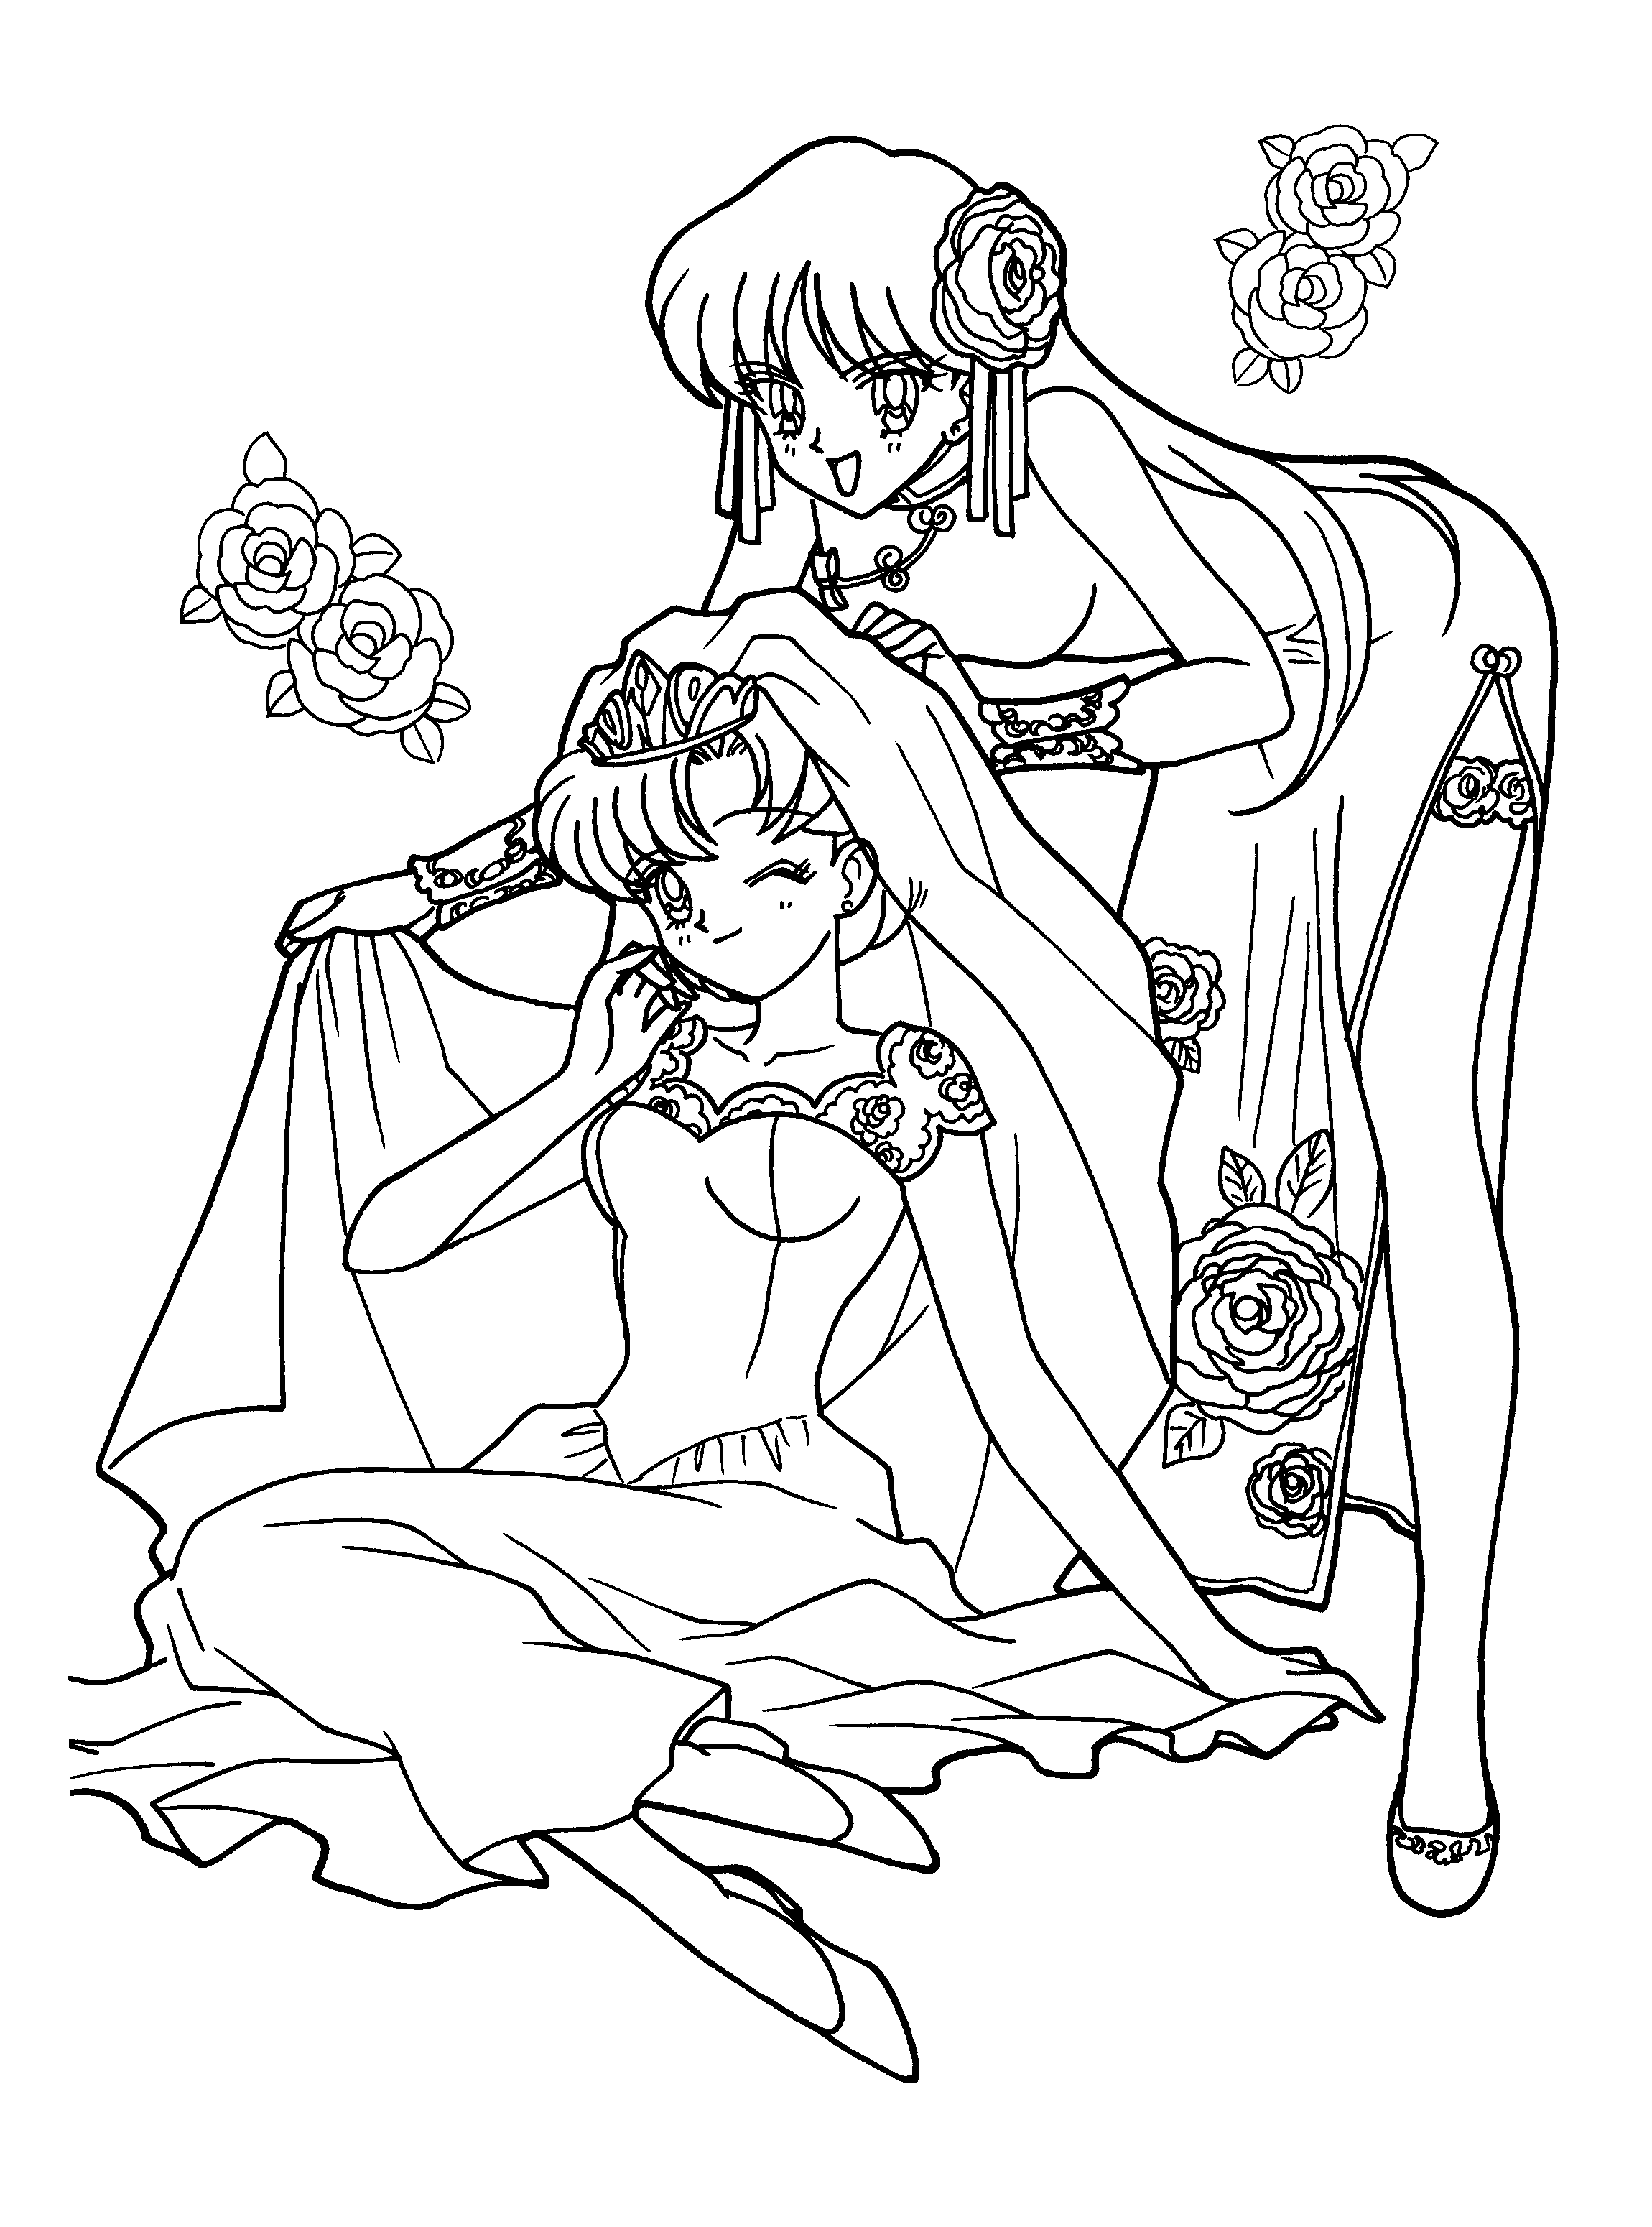 sailor moon coloring pages free printable sailor moon coloring pages for kids coloring pages sailor moon 1 1